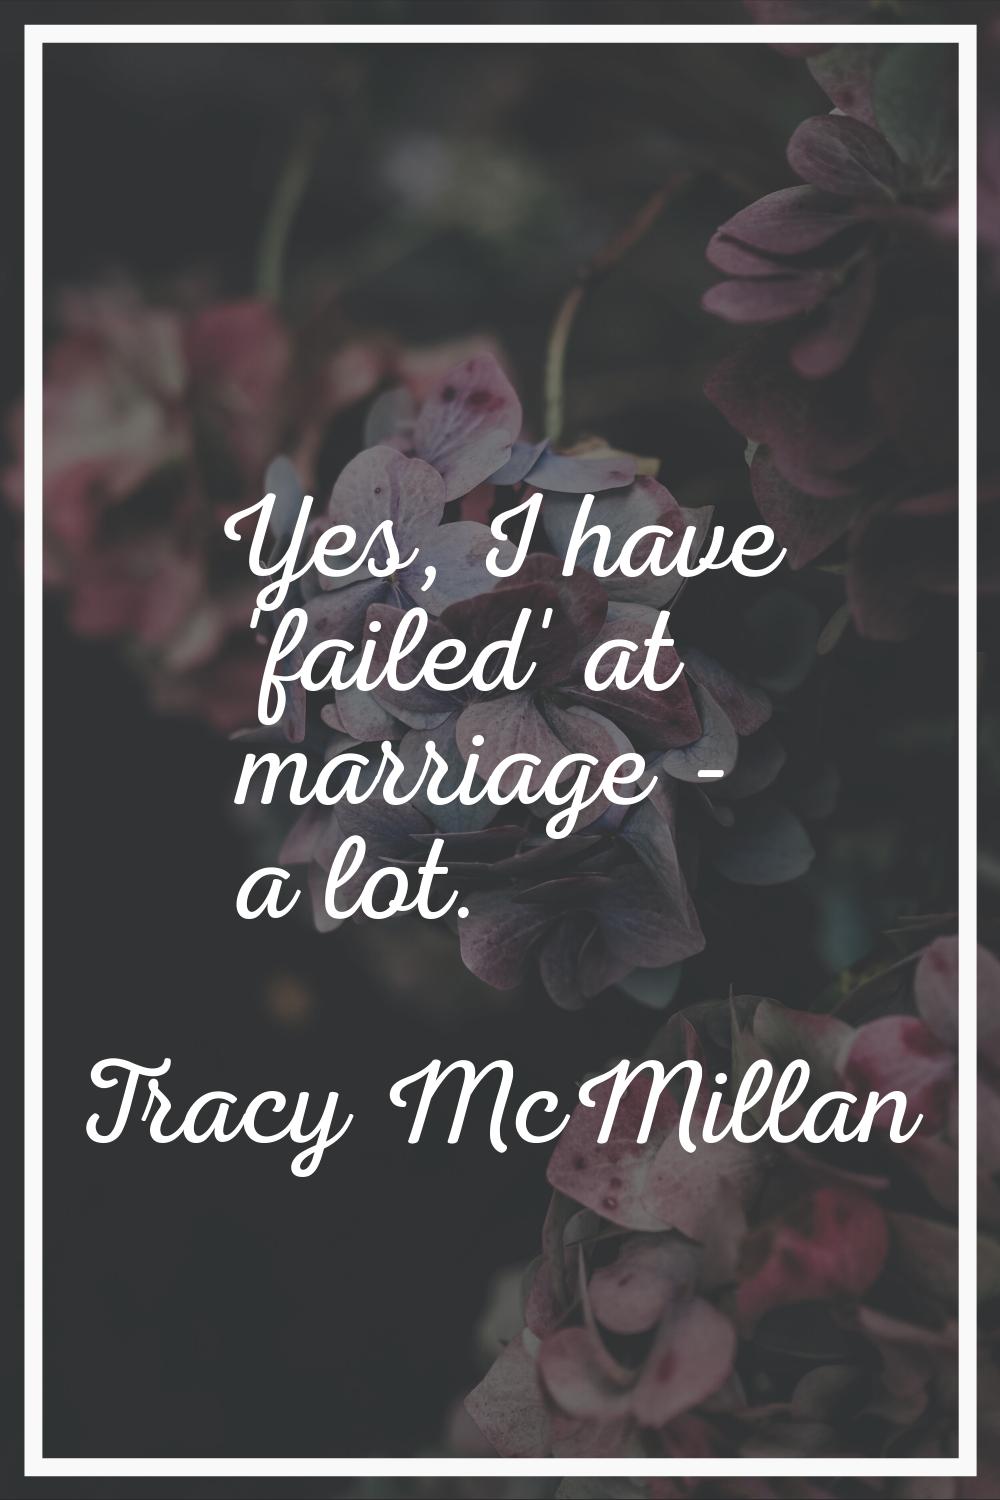 Yes, I have 'failed' at marriage - a lot.